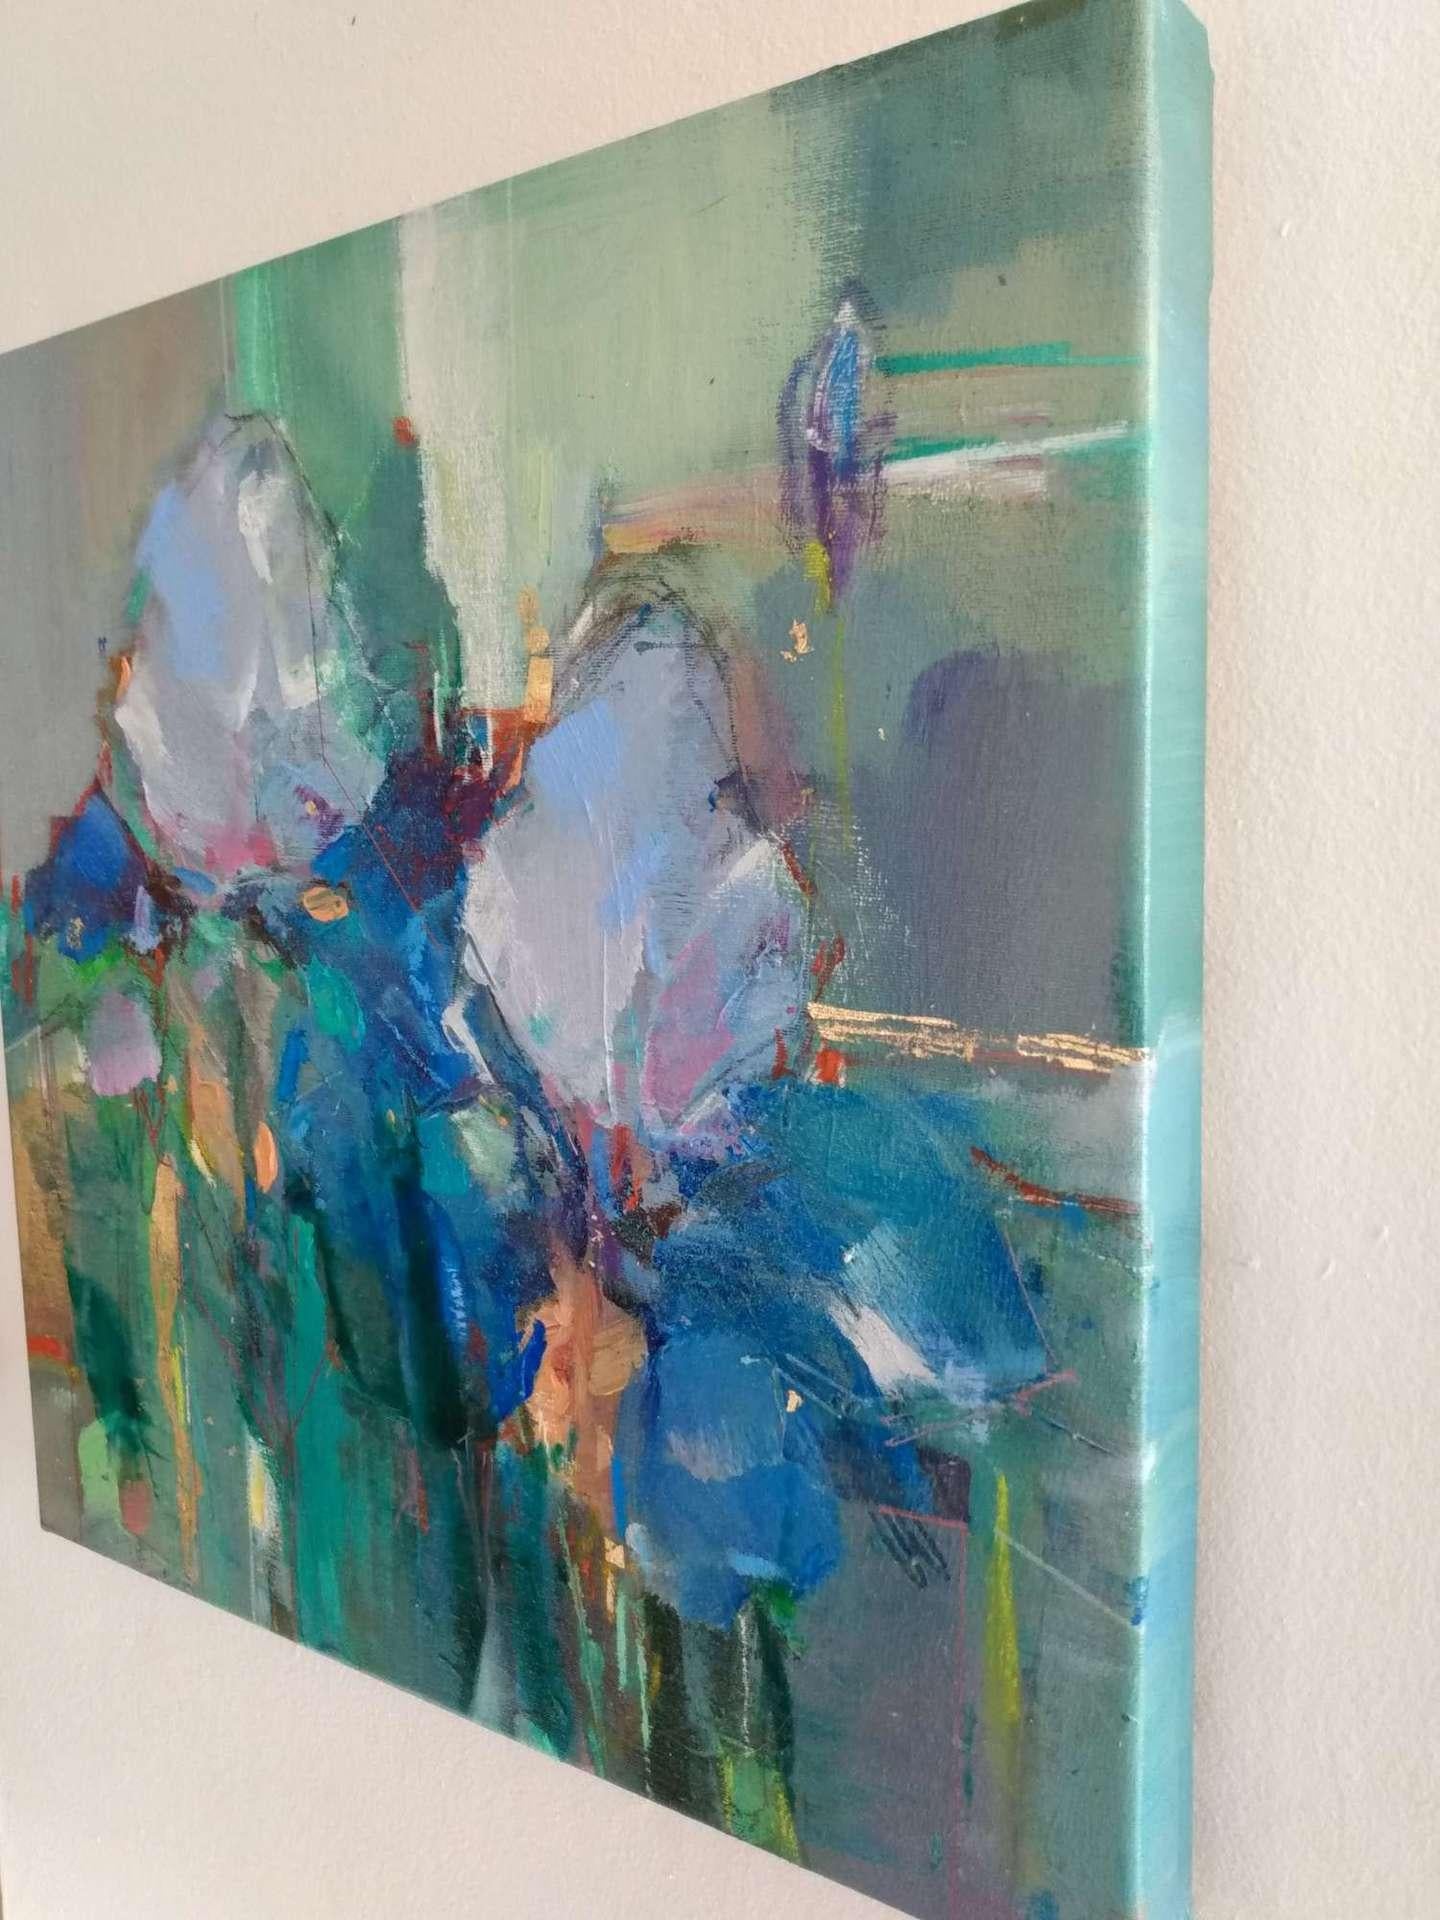 Magdalena Morey
Spring Blooms 3
Contemporary Still Life Painting
Mixed Media on Canvas
Canvas Size: H 40cm x W 40cm x D 3.5cm
Sold Unframed
(Please note that in situ images are purely an indication of how a piece may look.)

Spring Blooms 3 is an